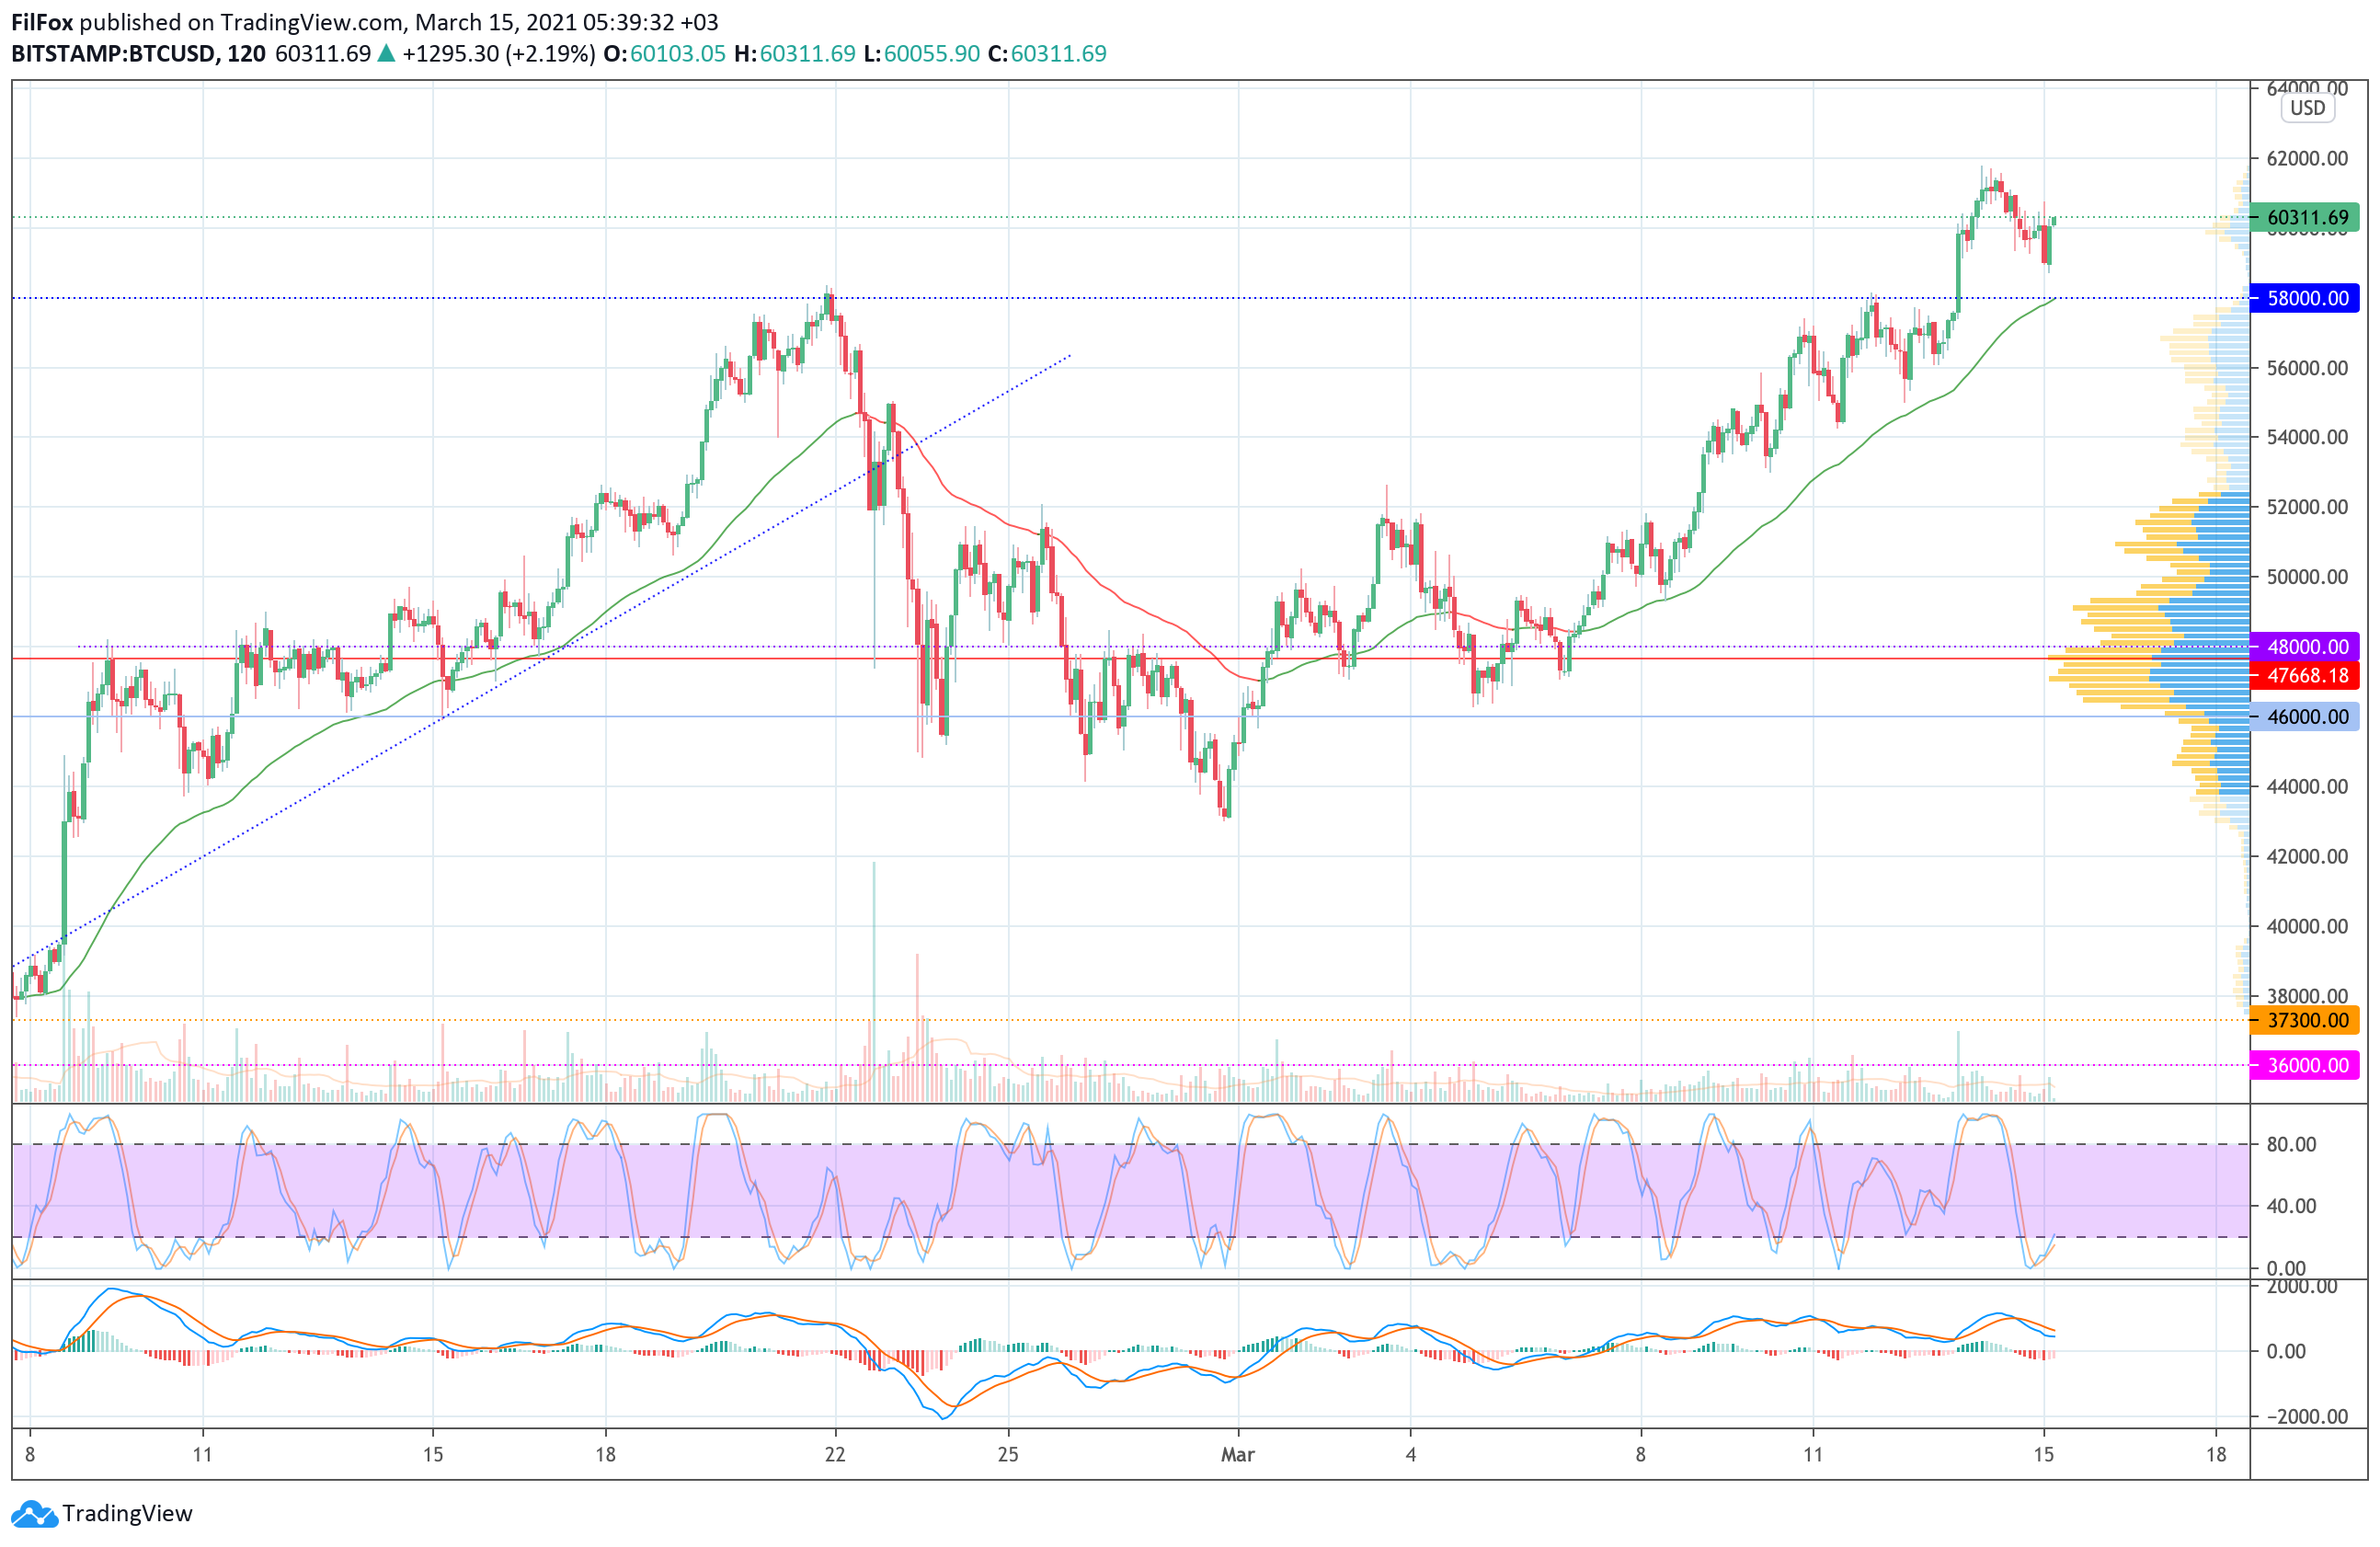 Analysis of the prices of Bitcoin, Ethereum, XRP for 03/15/2021